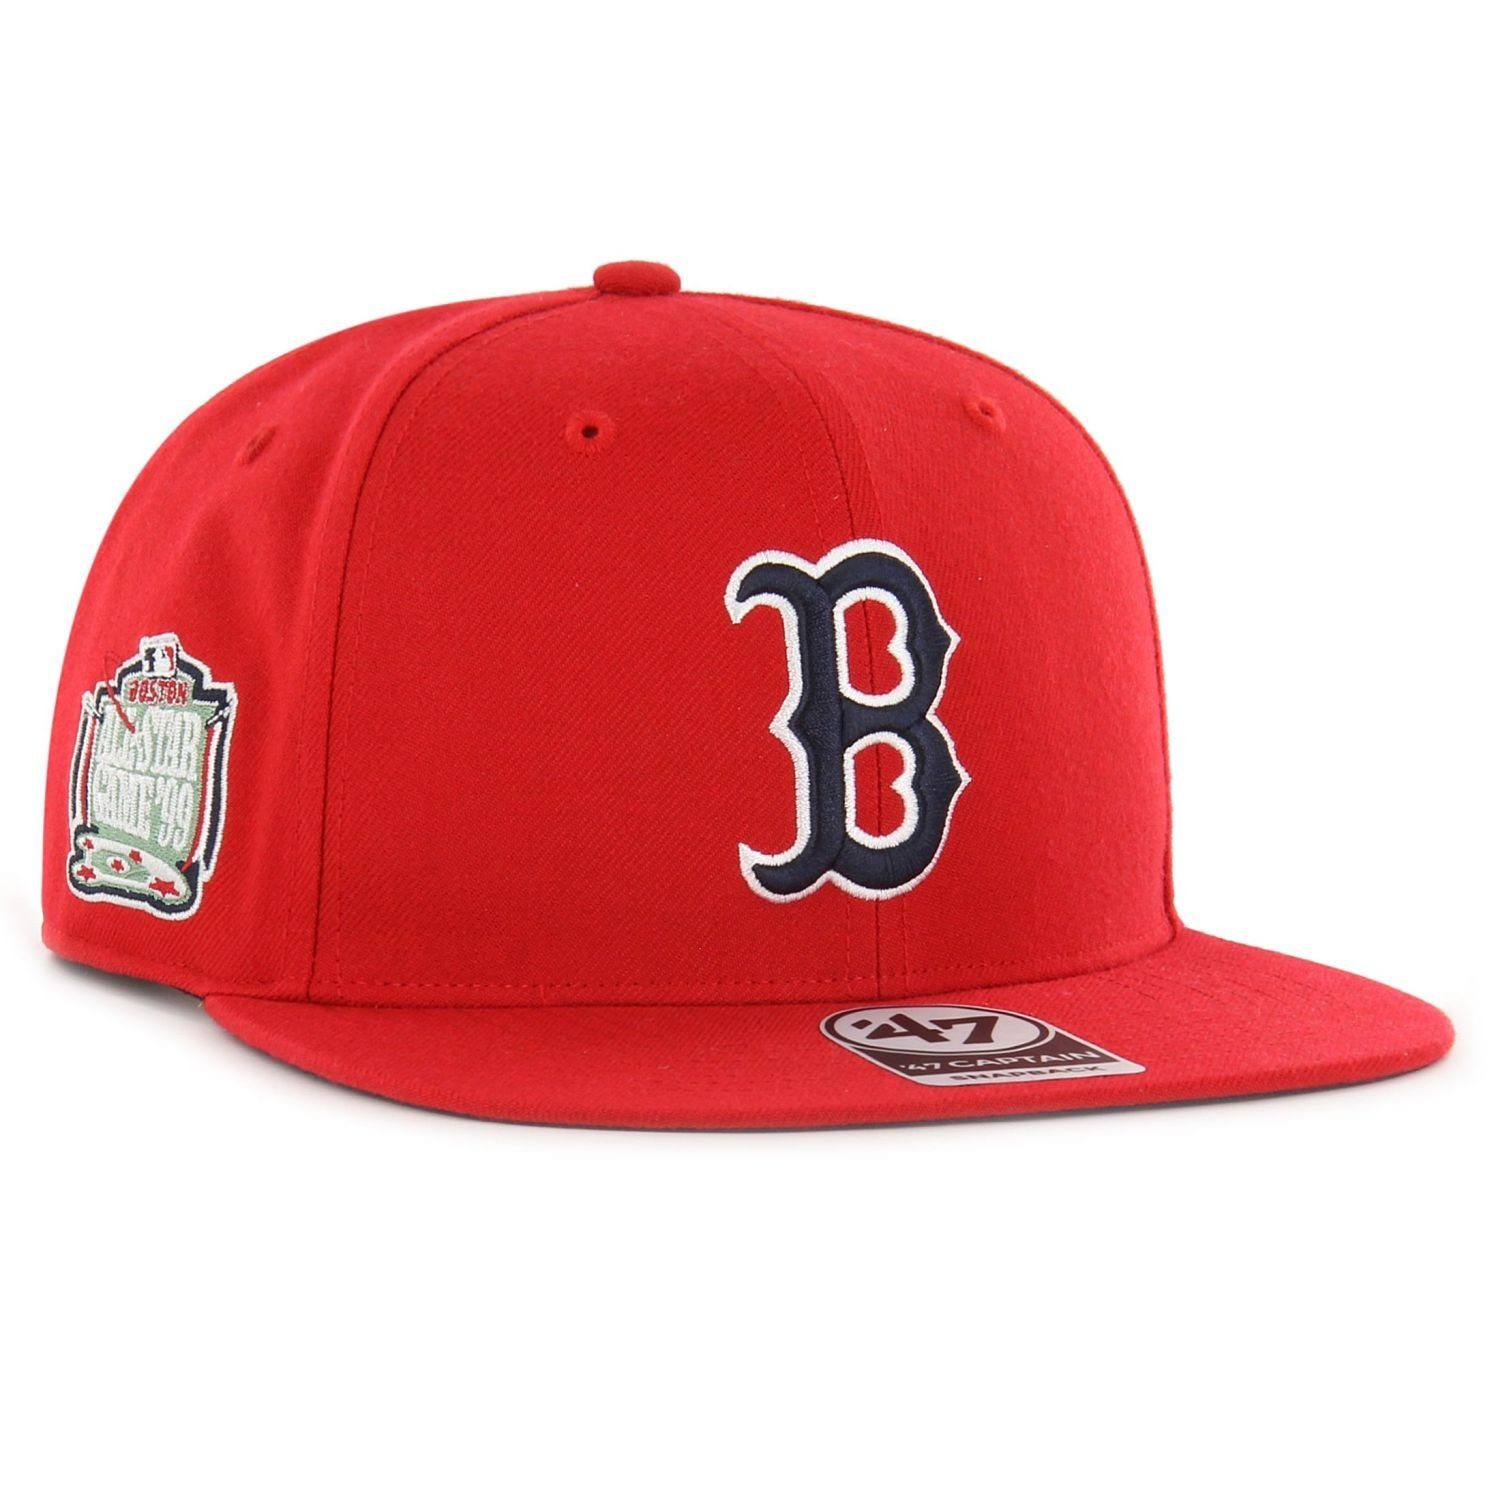 '47 Brand Snapback Cap ALL STAR GAME Boston Red Sox